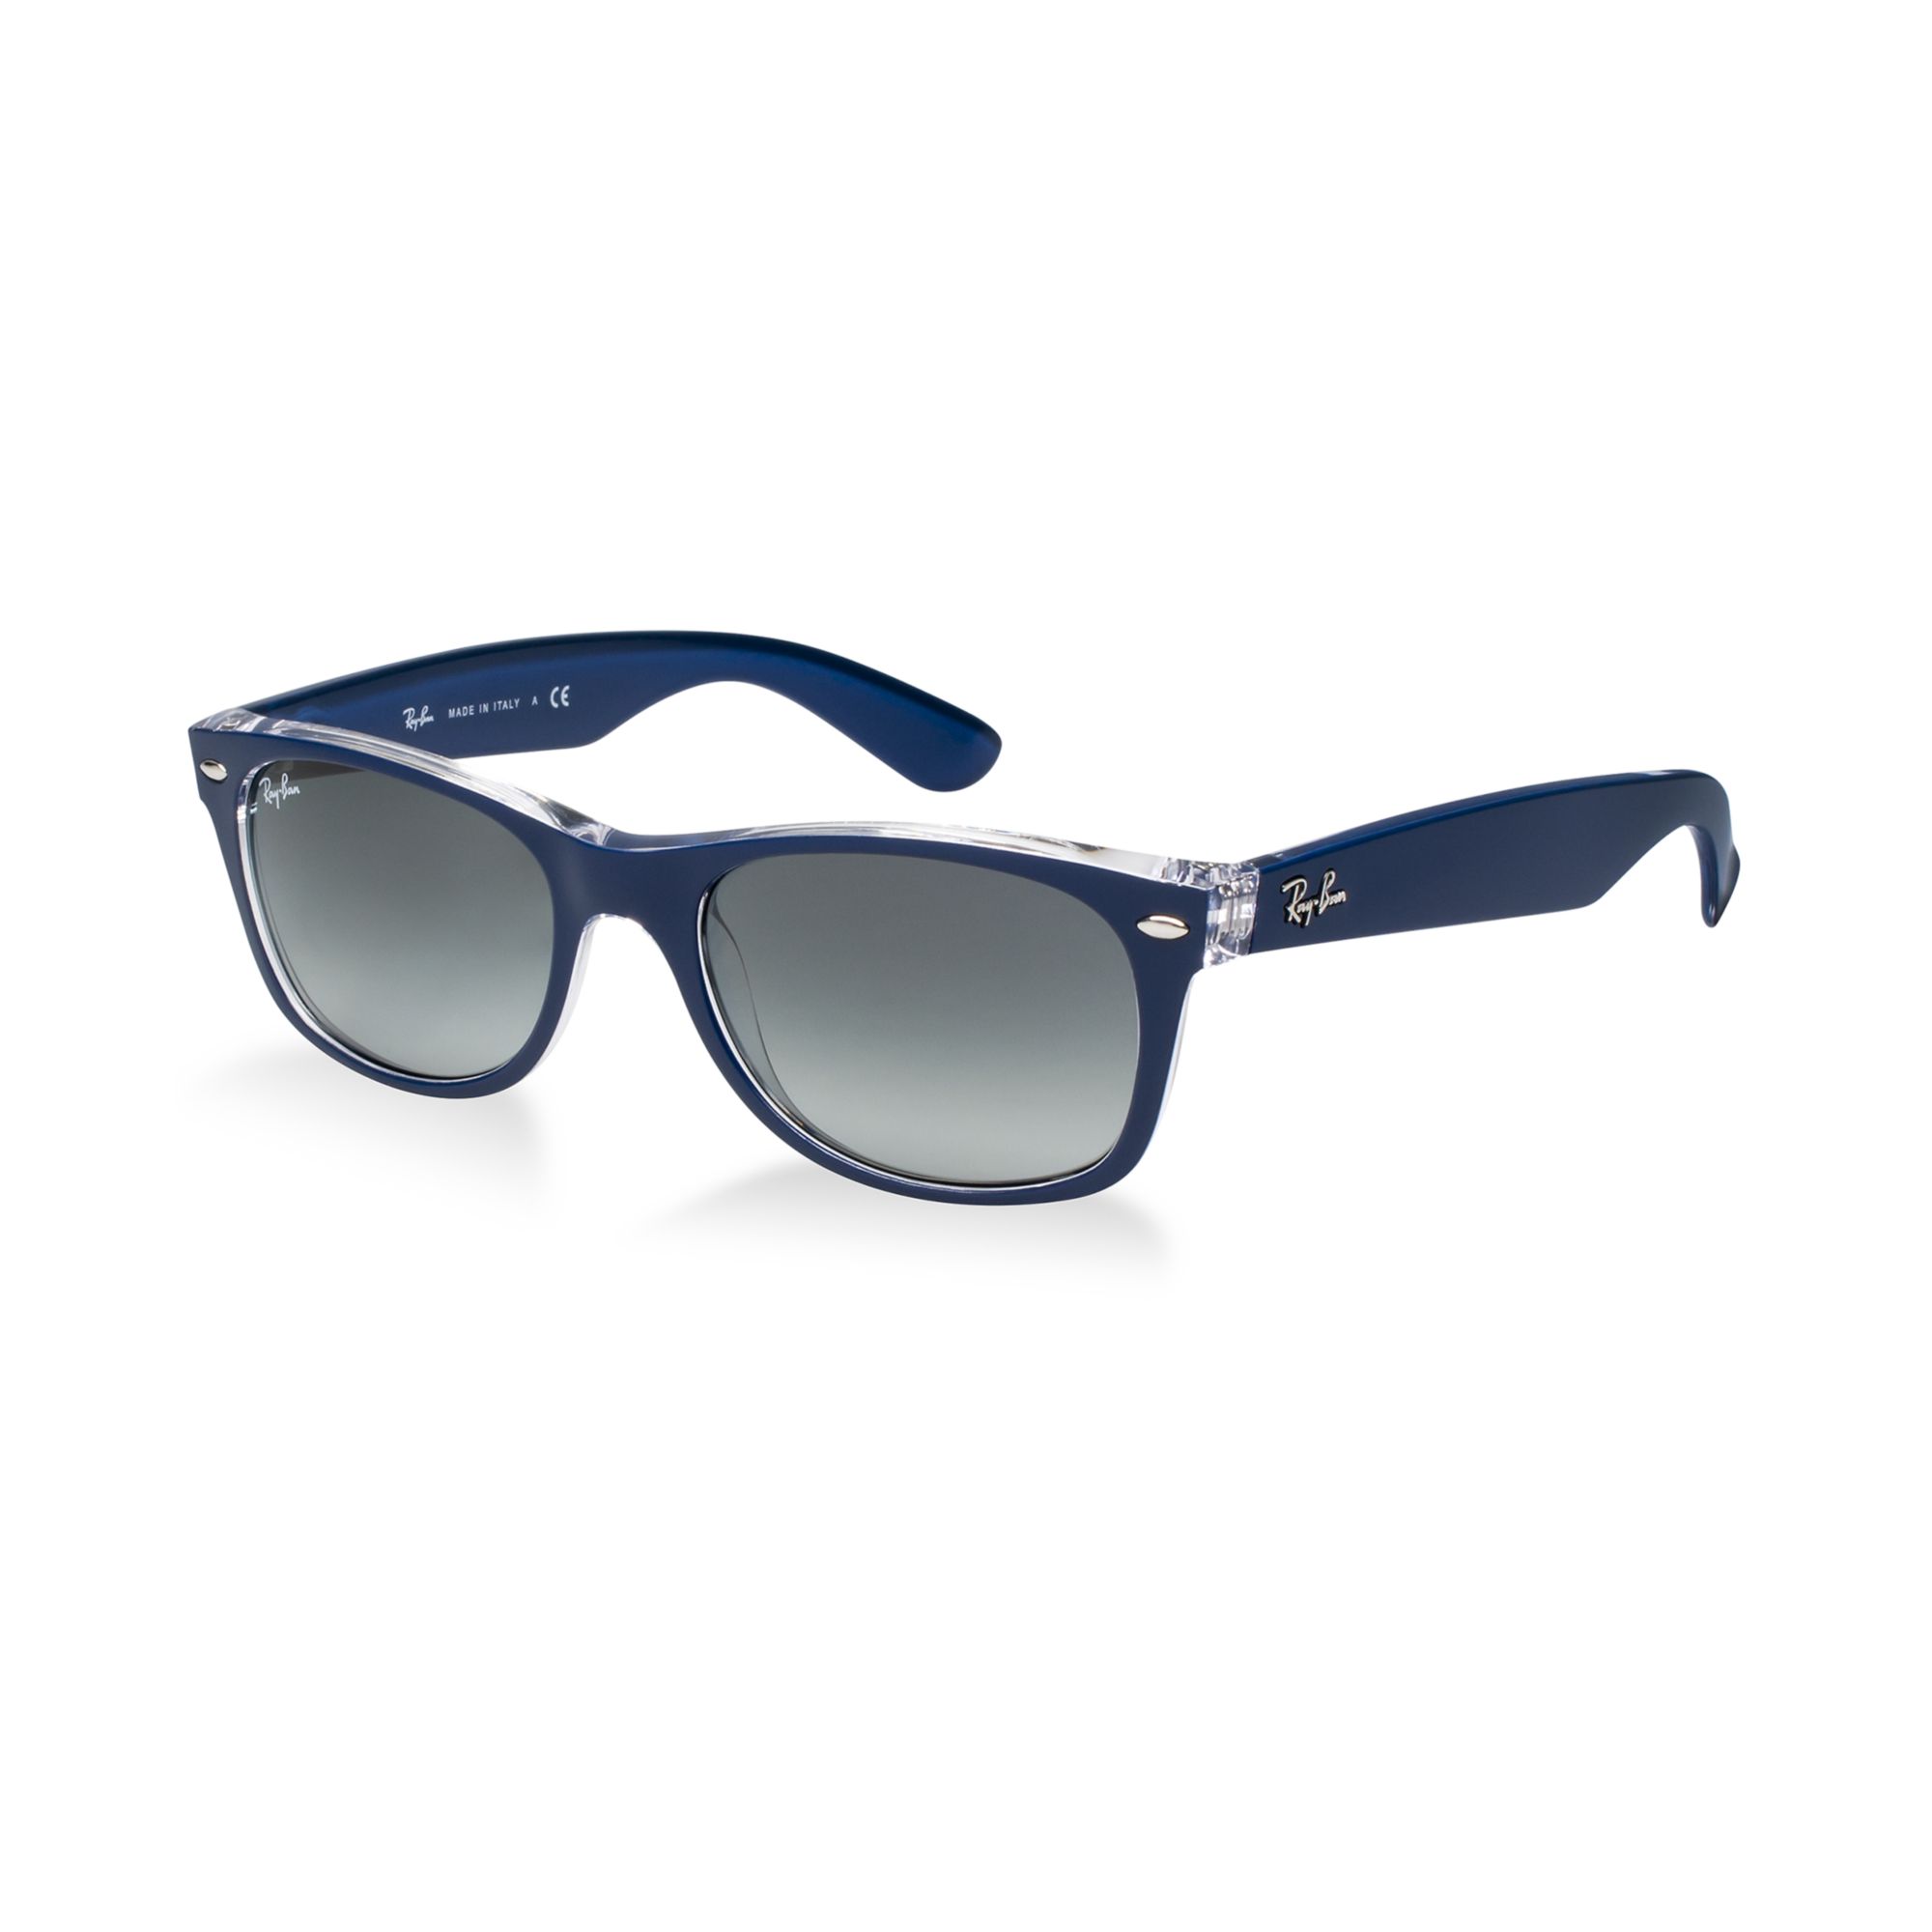 Lyst - Ray-Ban Sunglasses, Rb2132 55 in Blue